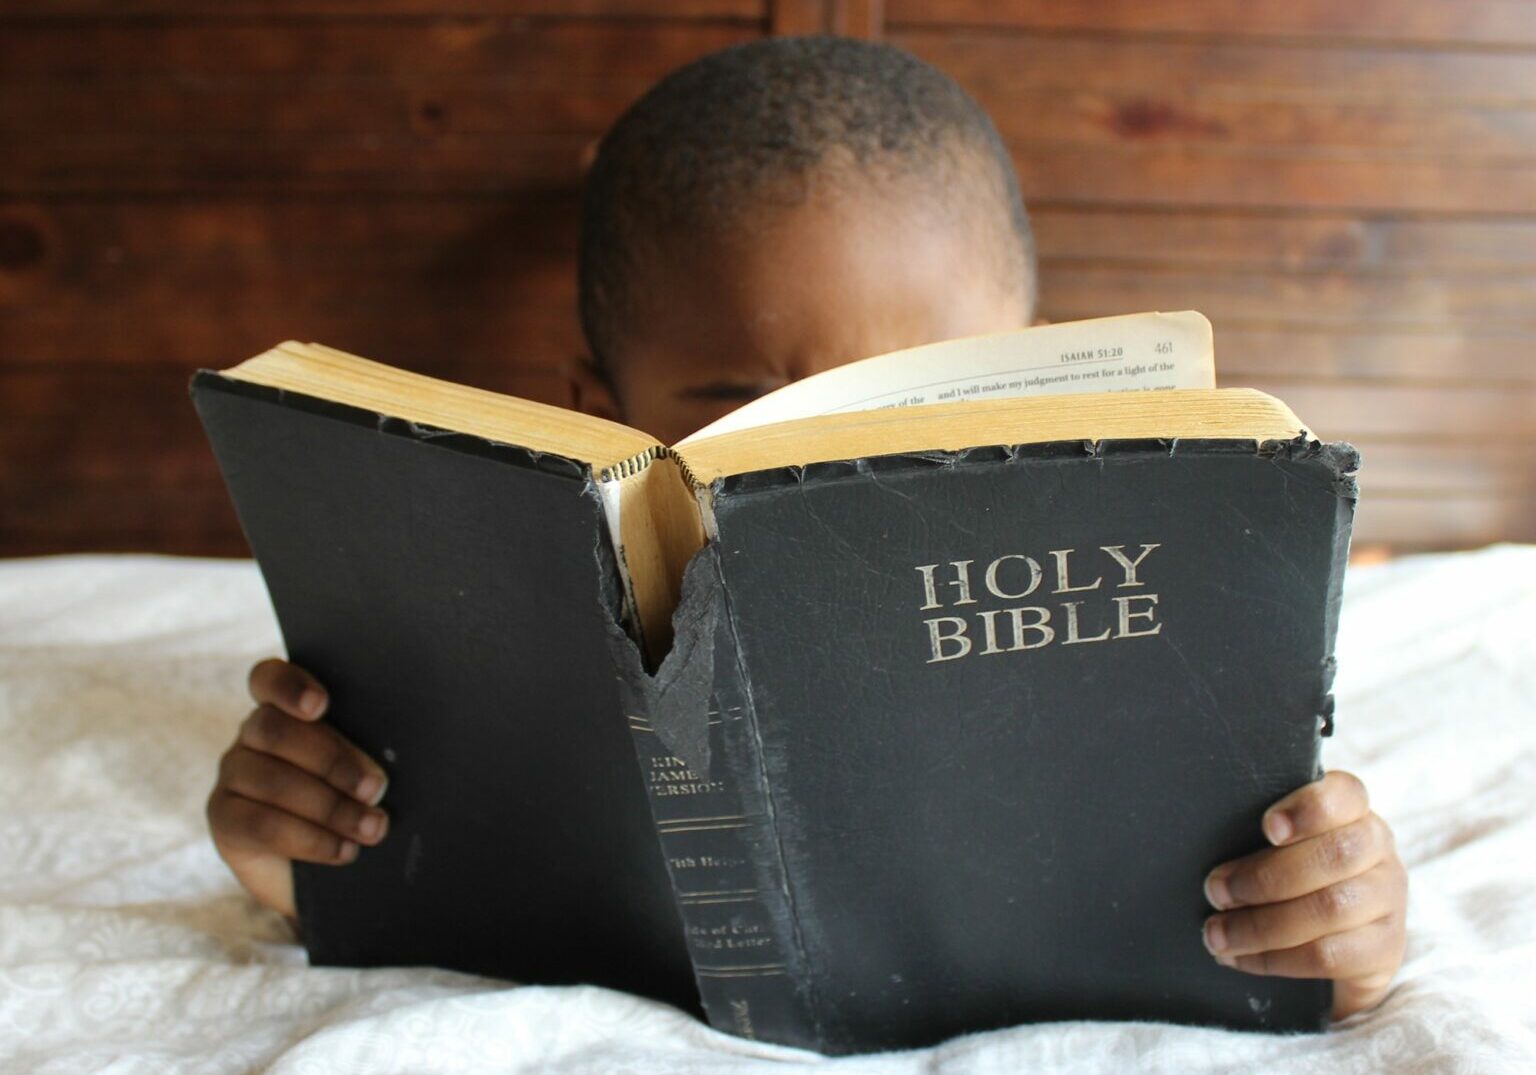 A black child sitting in bed reading a Bible